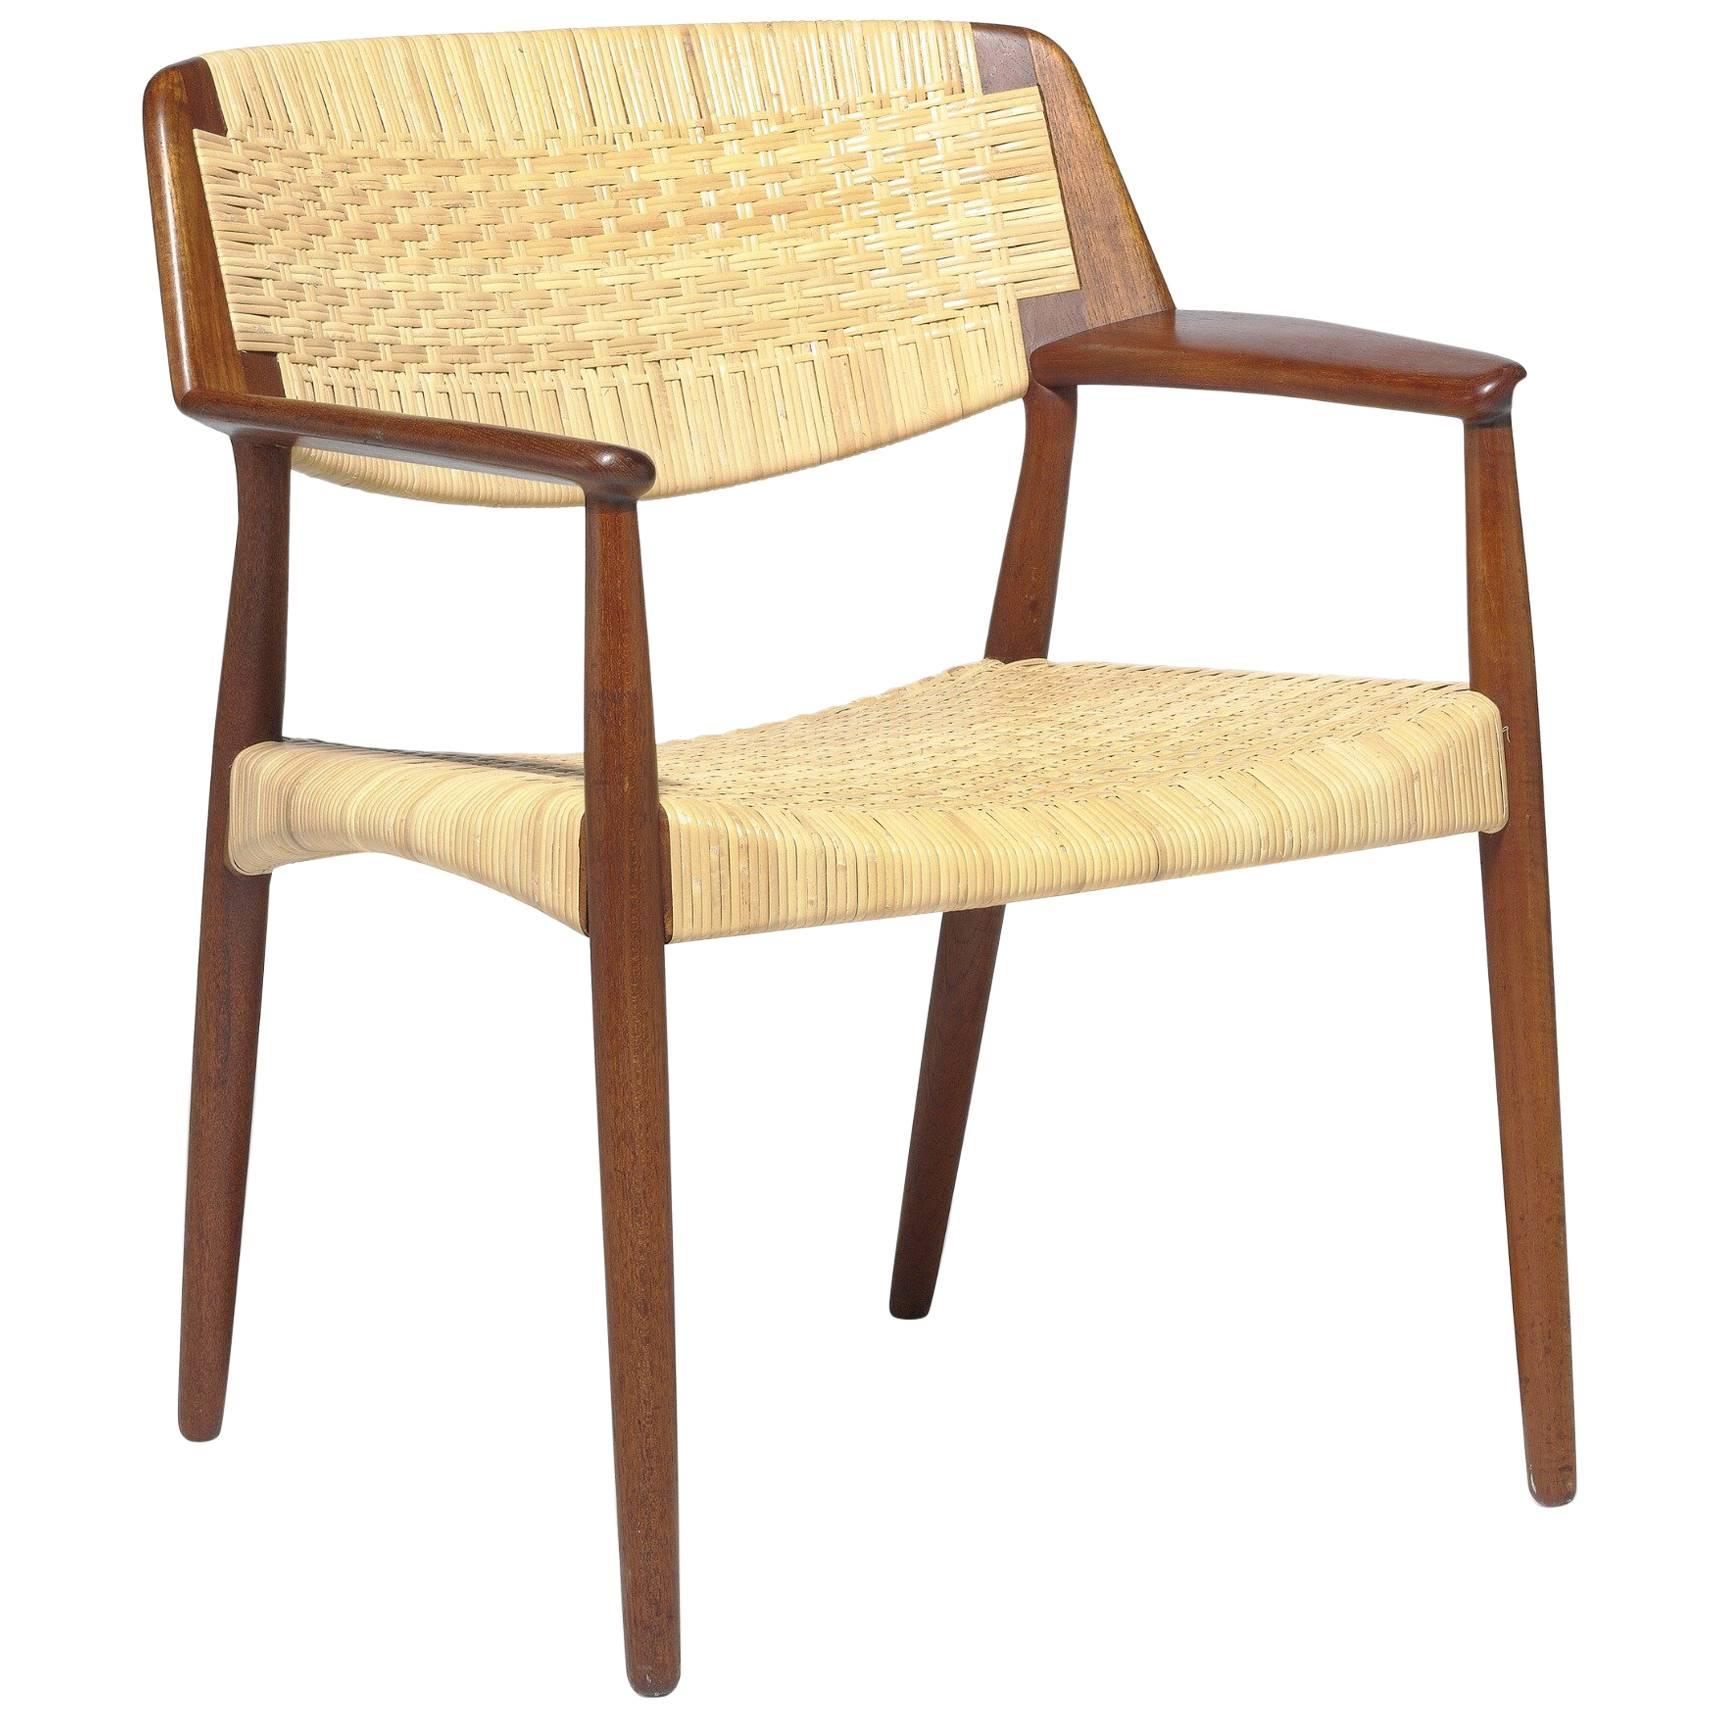 Ejnar Larsen & Bender Madsen Teak and Cane Chair Made by Willy Beck For Sale